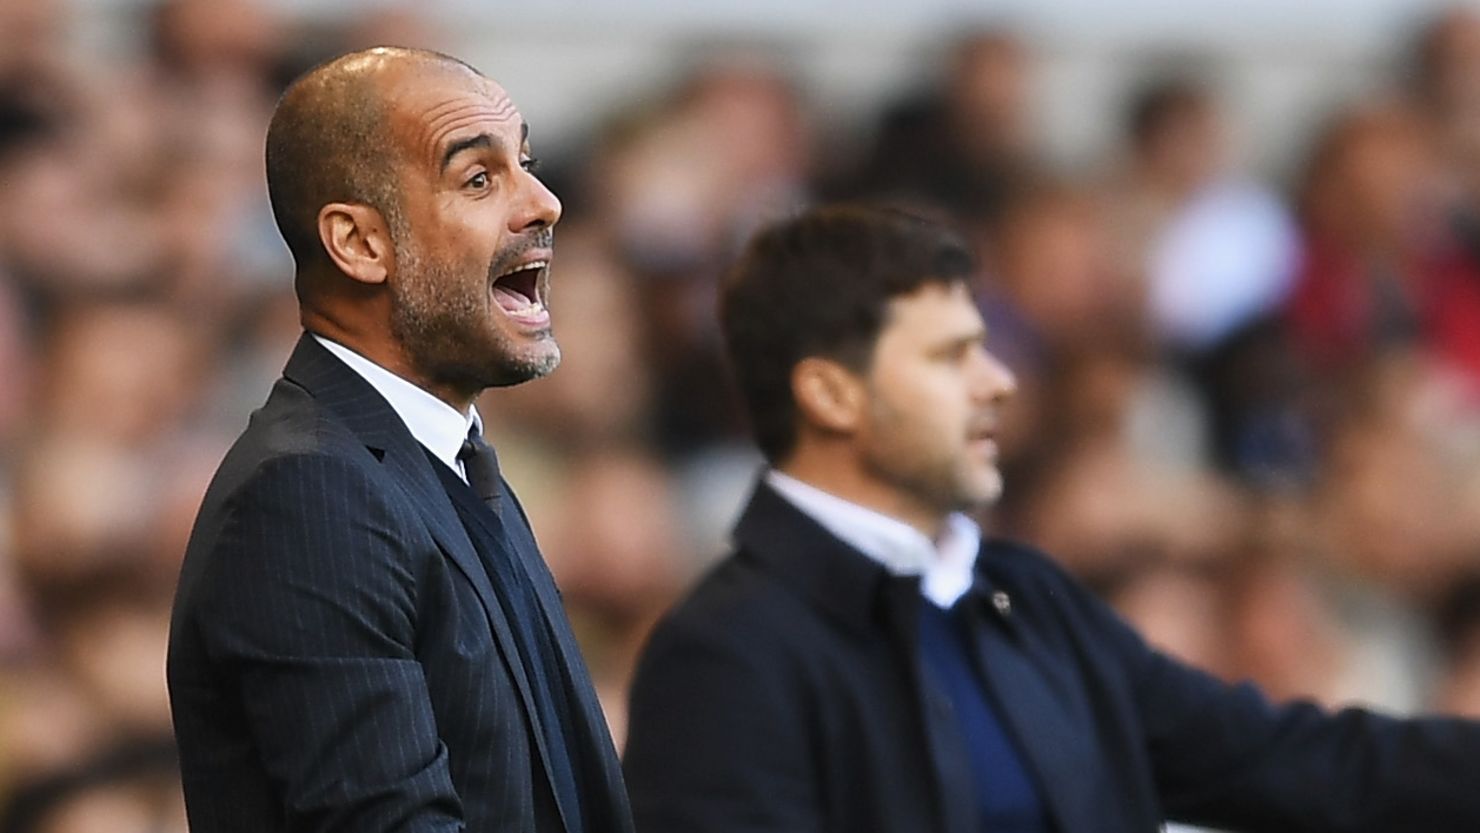 Pep Guardiola saw his Manchester City team slip to a first defeat of the season at the hands of Mauricio Pochettino's Tottenham Hotspur.